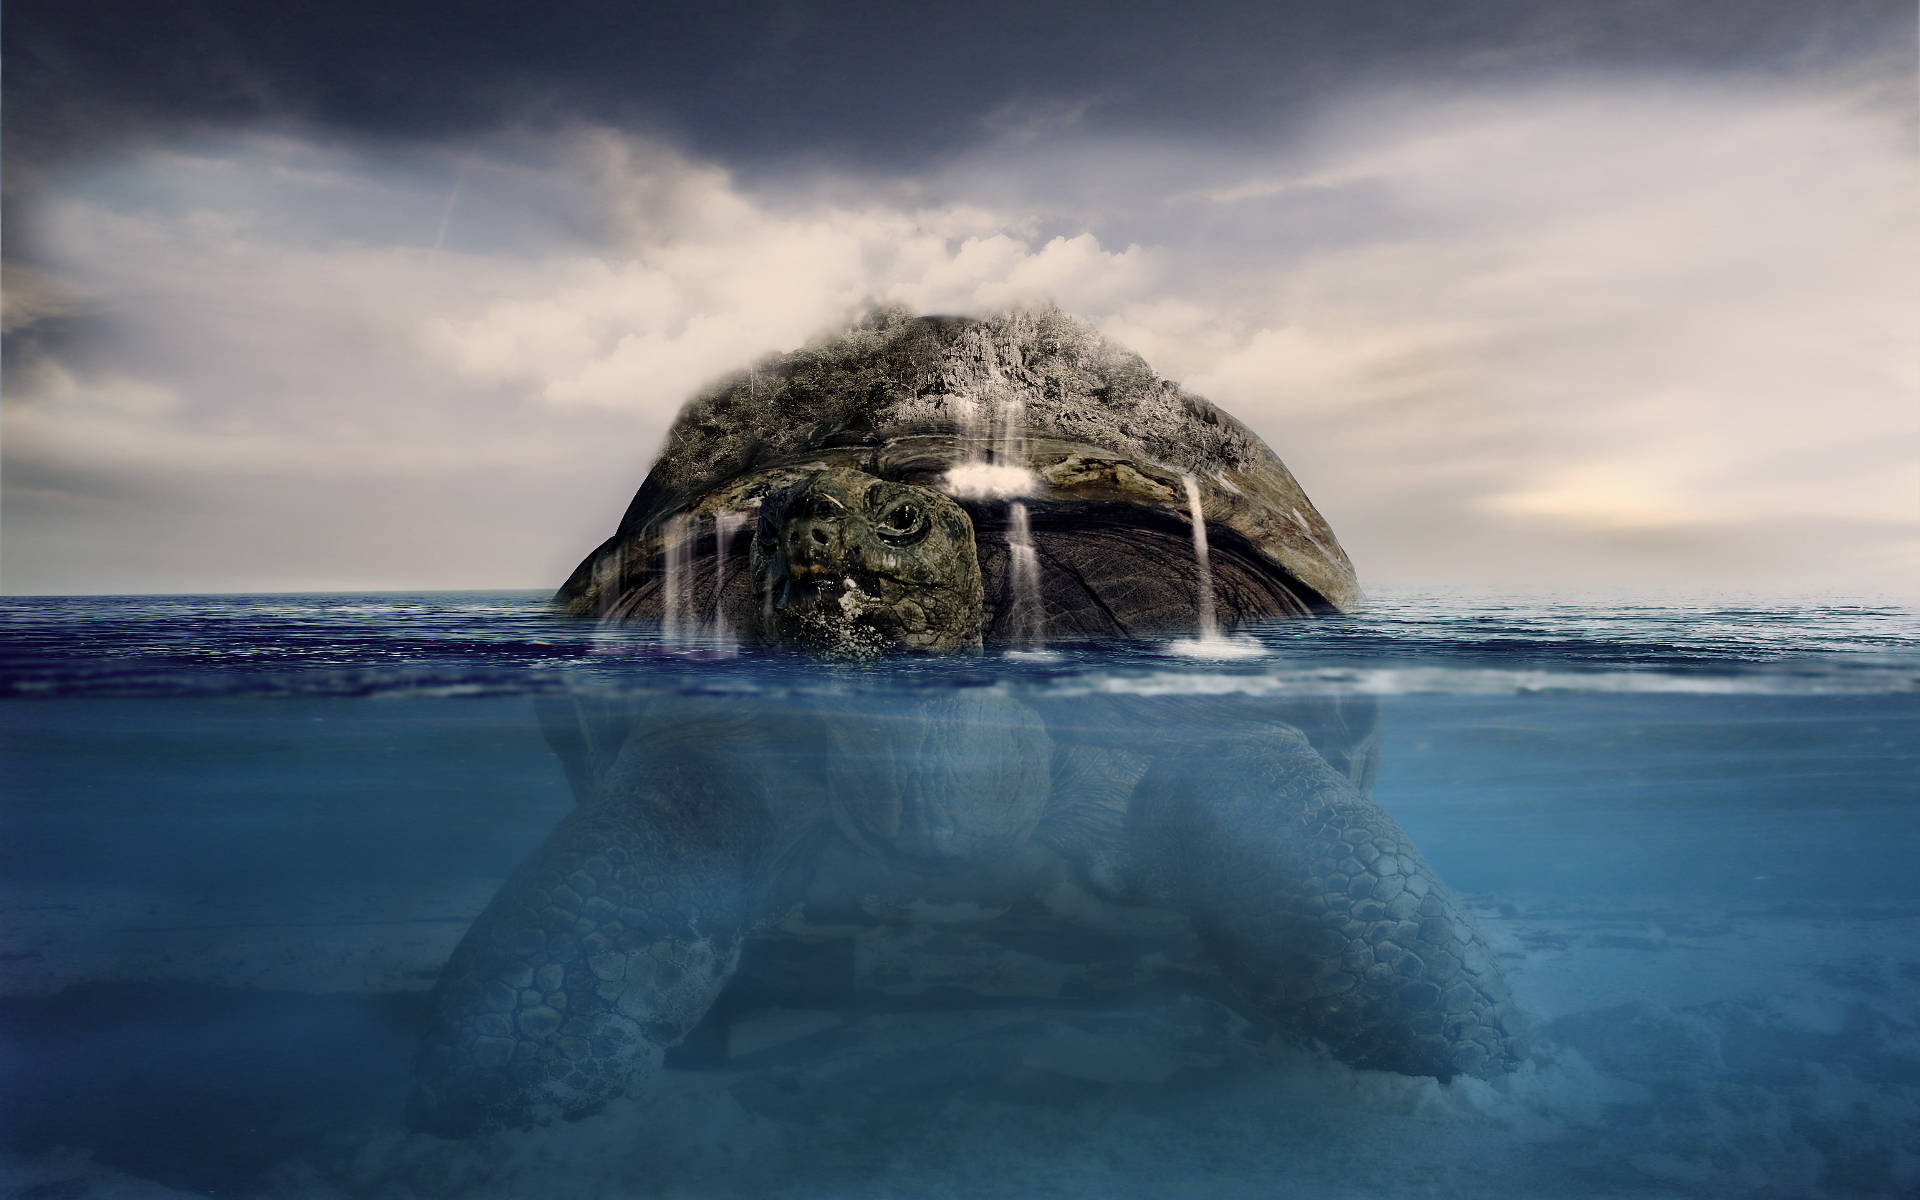 Gigantic Cool Turtle In The Sea Wallpaper